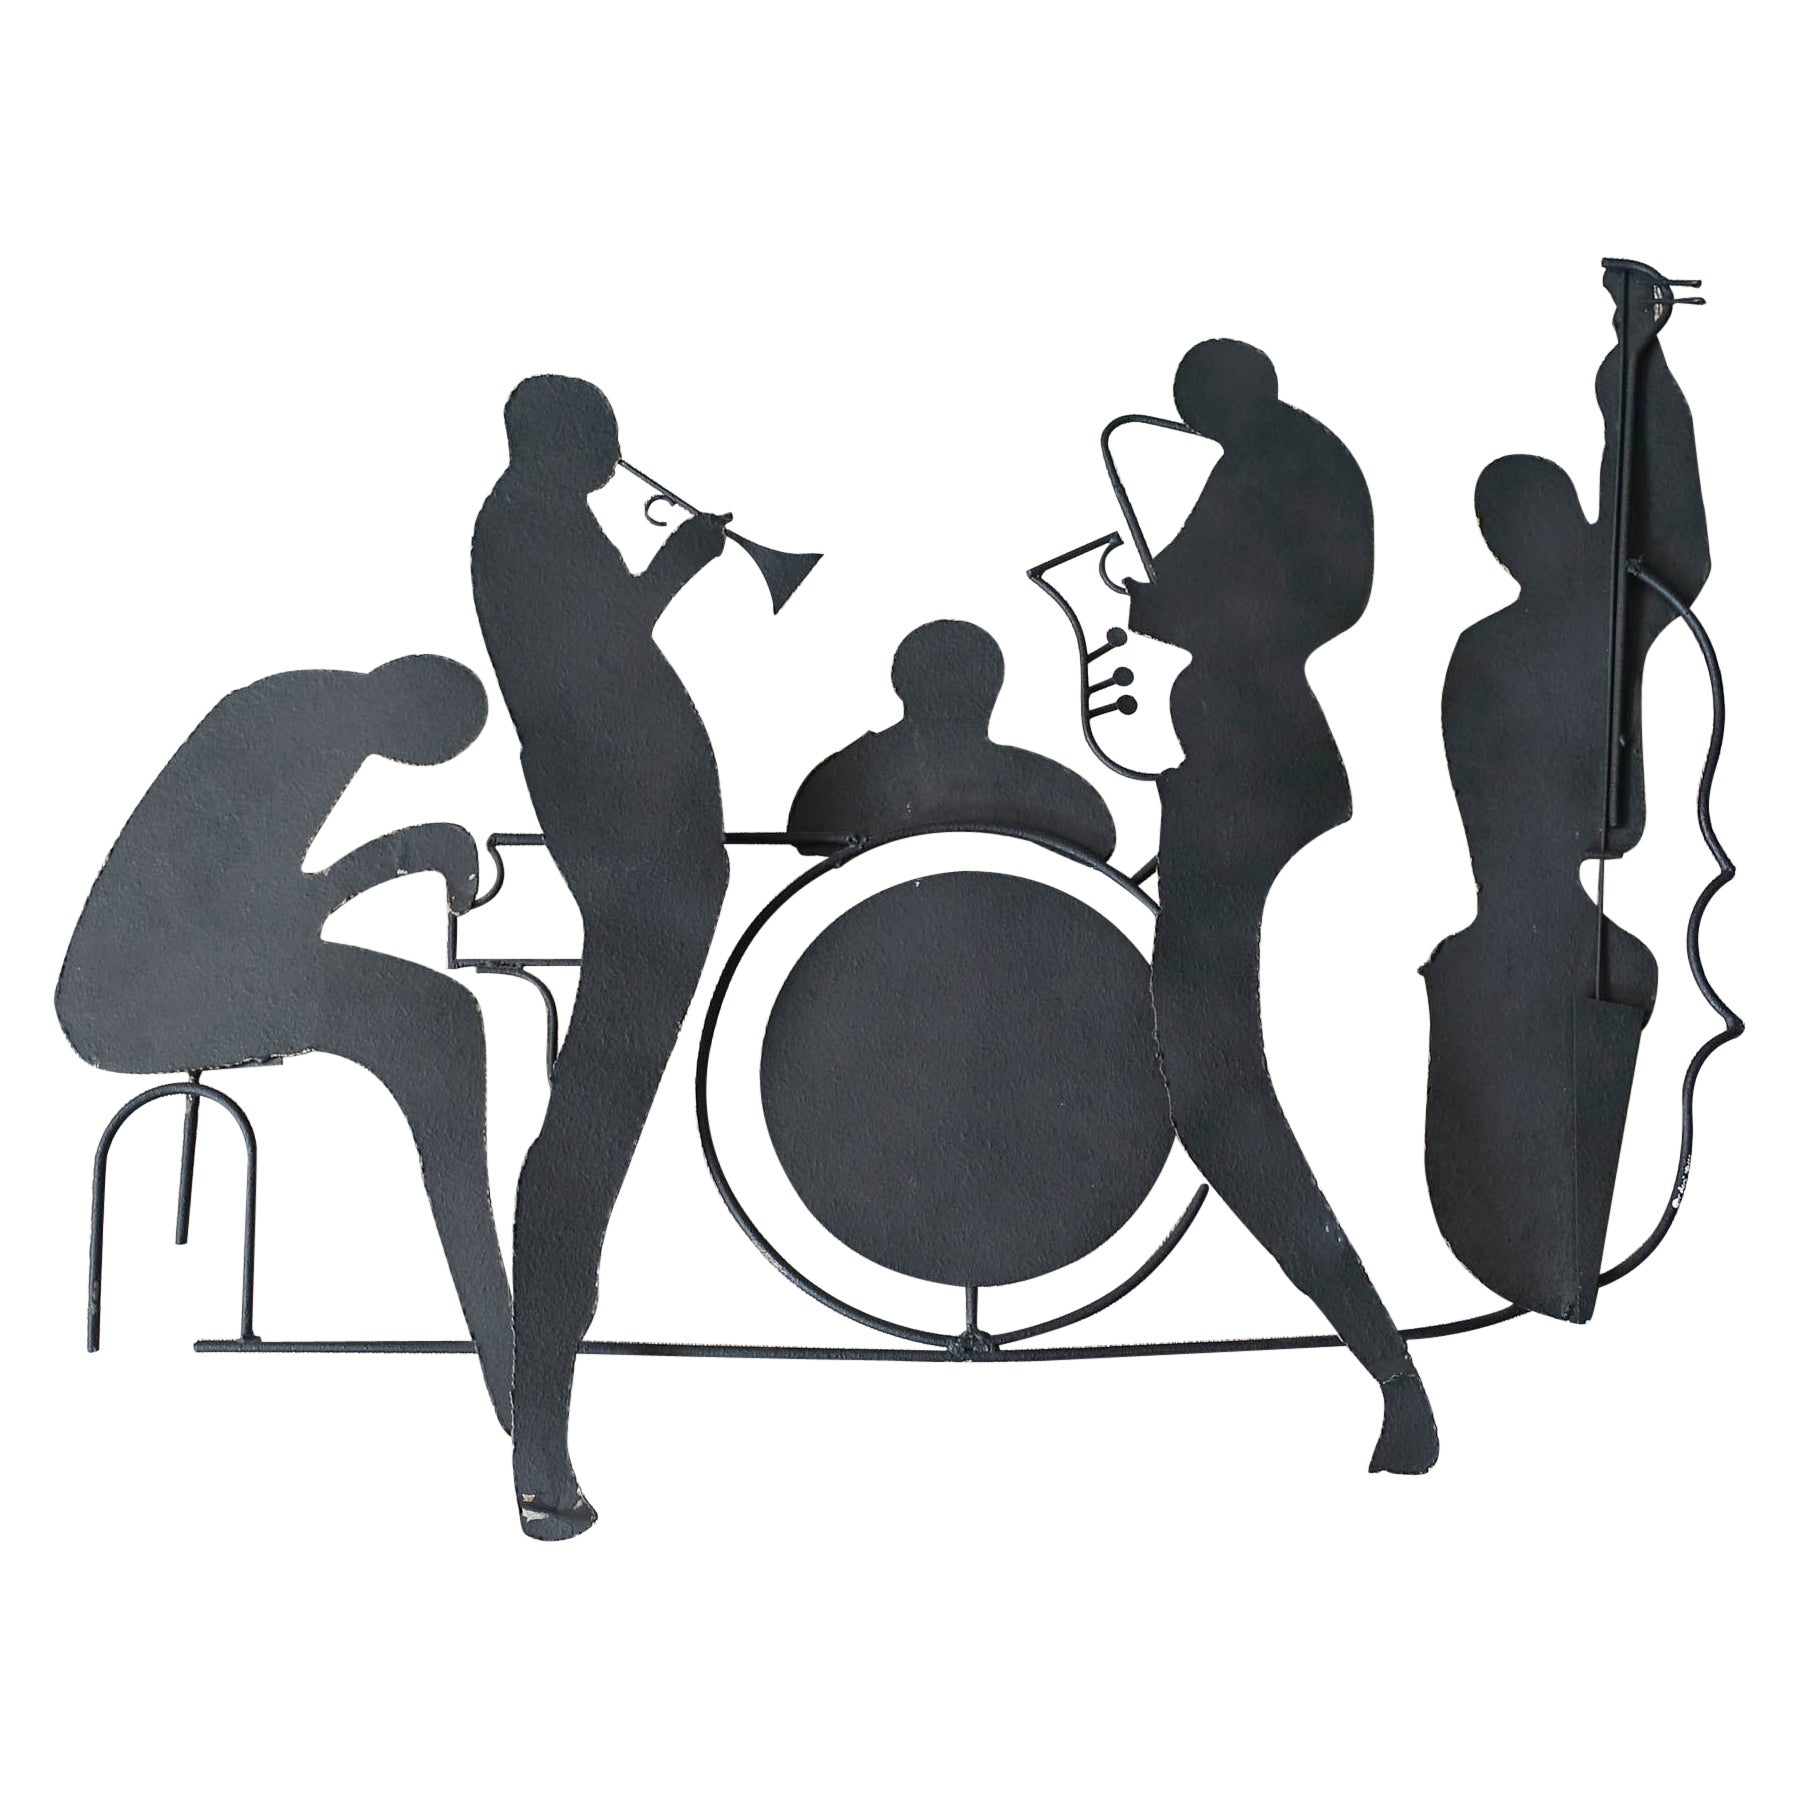 Curtis Jeré Brutalist Jazz Band Wall Sculpture for Artisan House, USA, 1991 For Sale